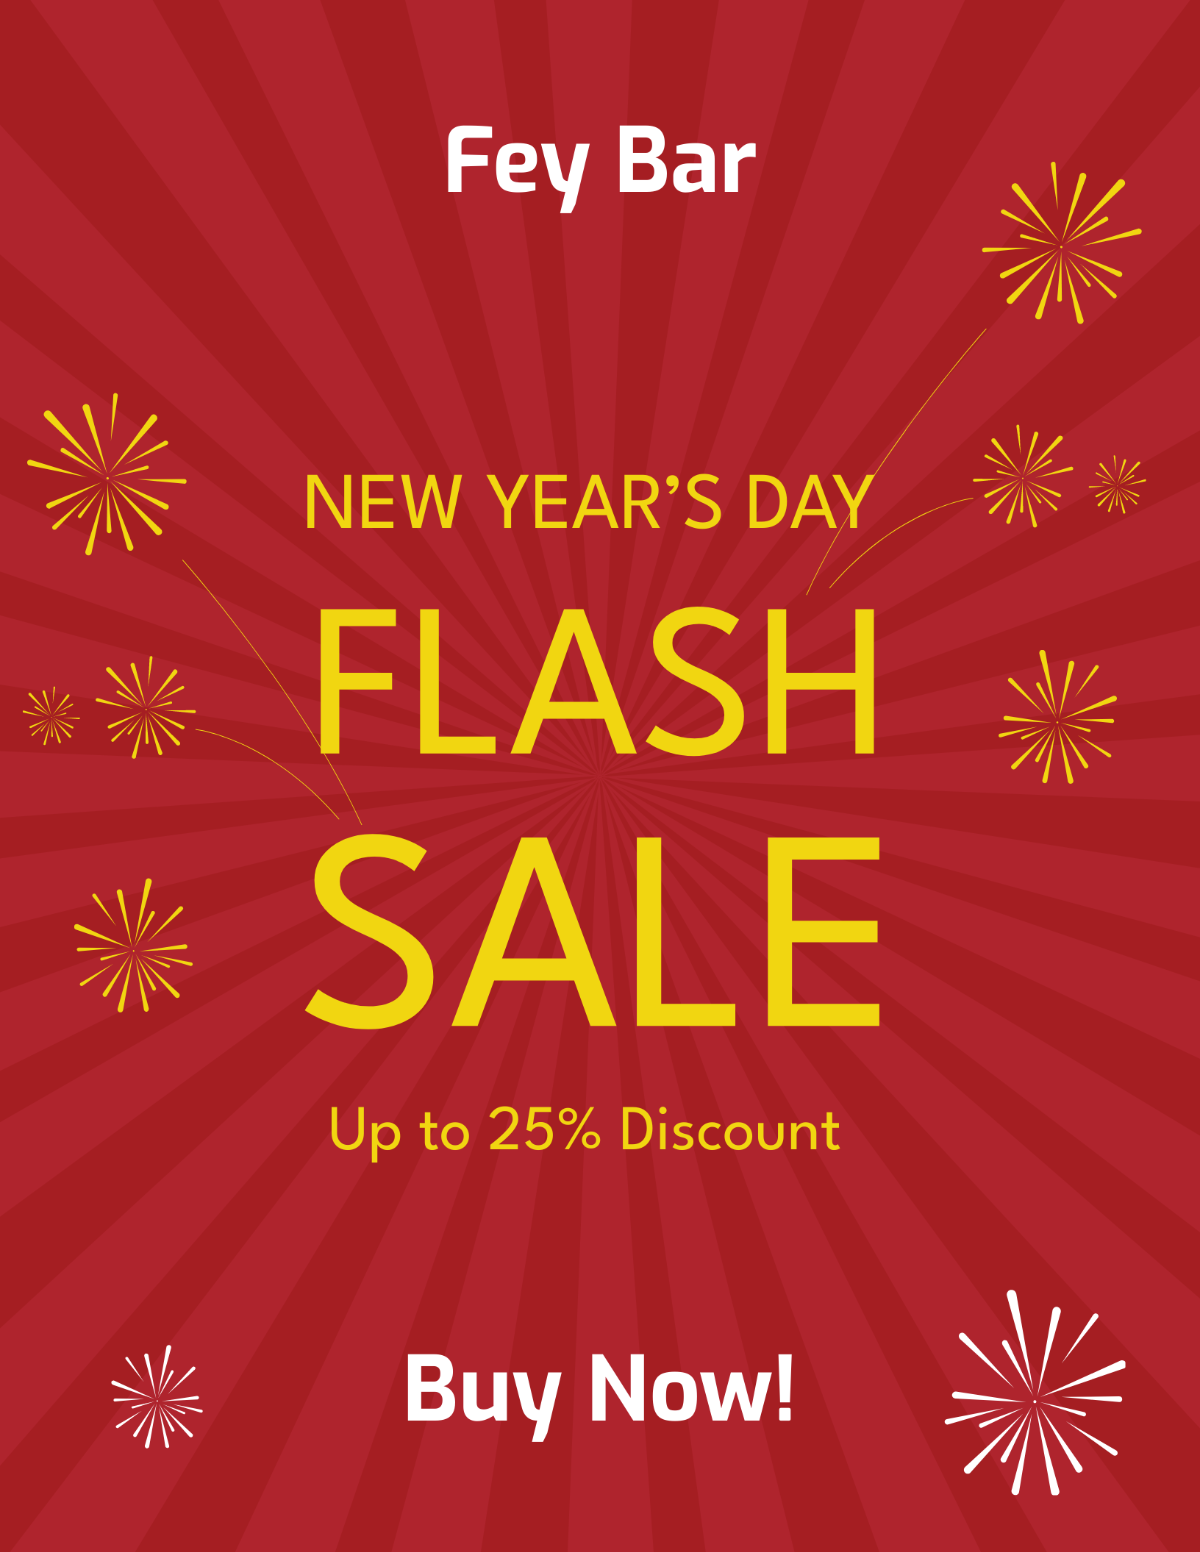 New Year's Day Advertising Flyer Template